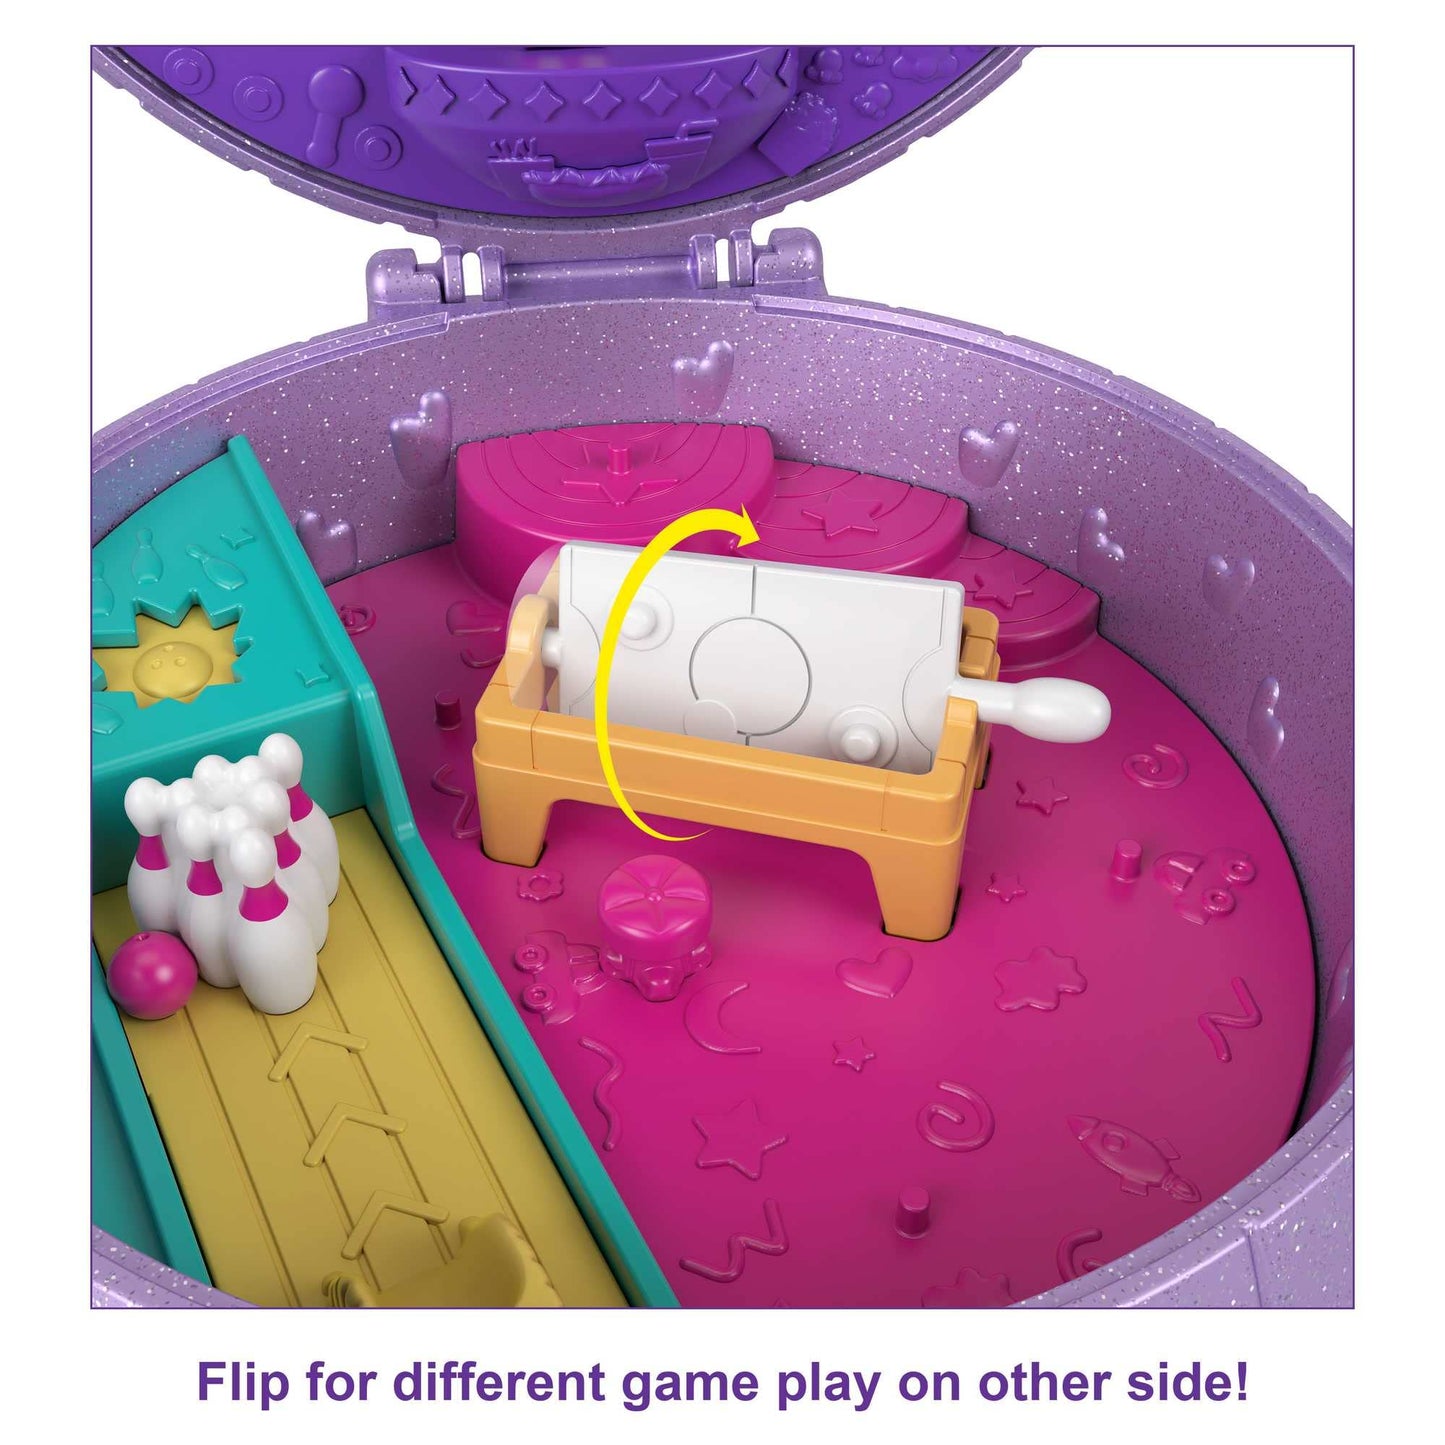 Polly Pocket Dolls and Accessories, Compact with 2 Micro Dolls, 15 Toy Pieces and 1 Fashion Piece, Double Play Skating